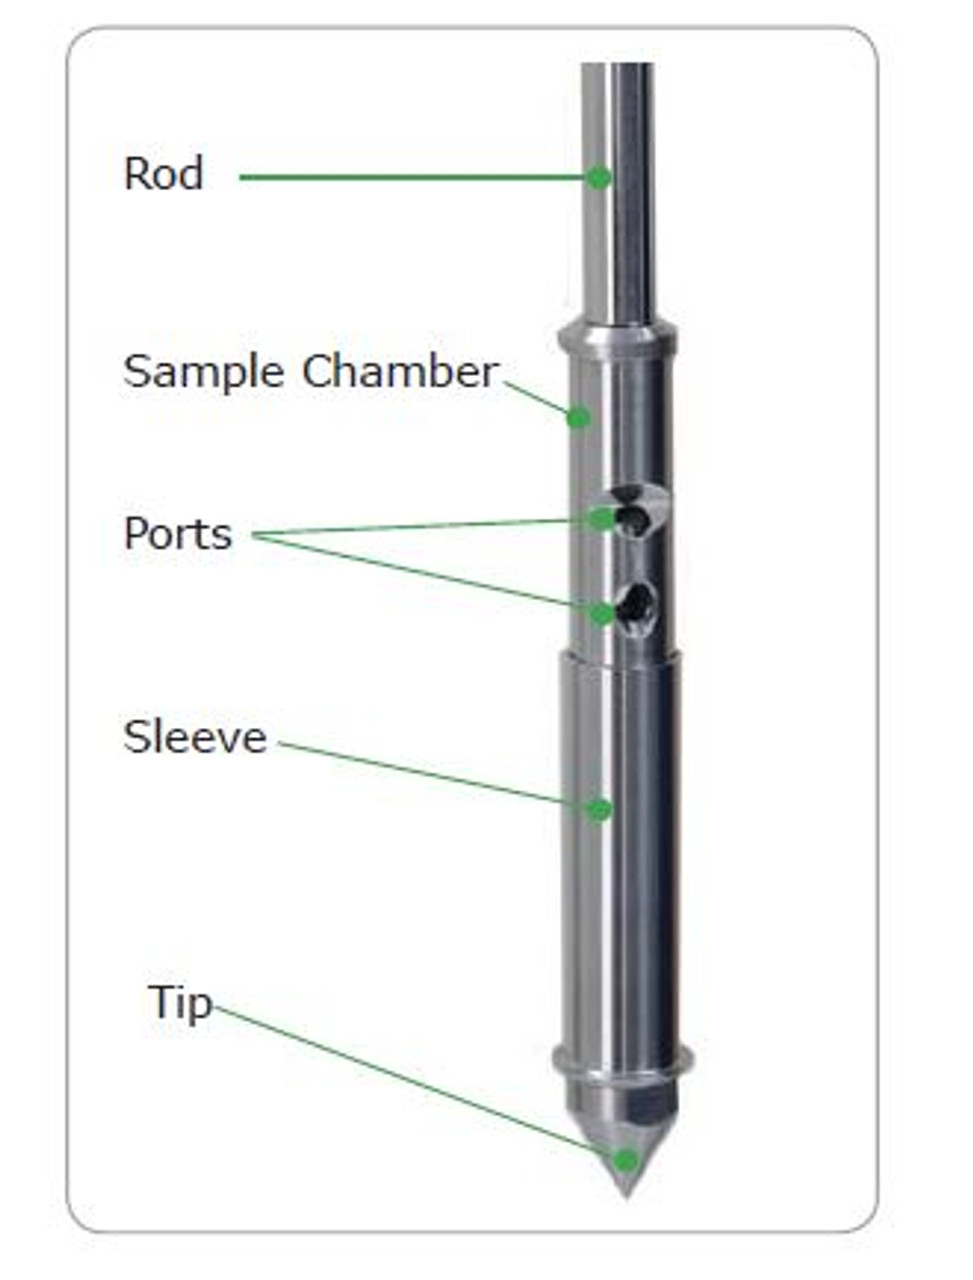 U-D Sleeve Sampler Set (675 1500S01) - The set includes a range of 10
interchangeable tips to allow different sample volumes to be taken.
Extension rods allow samples to be taken from a depth of up to 3m.